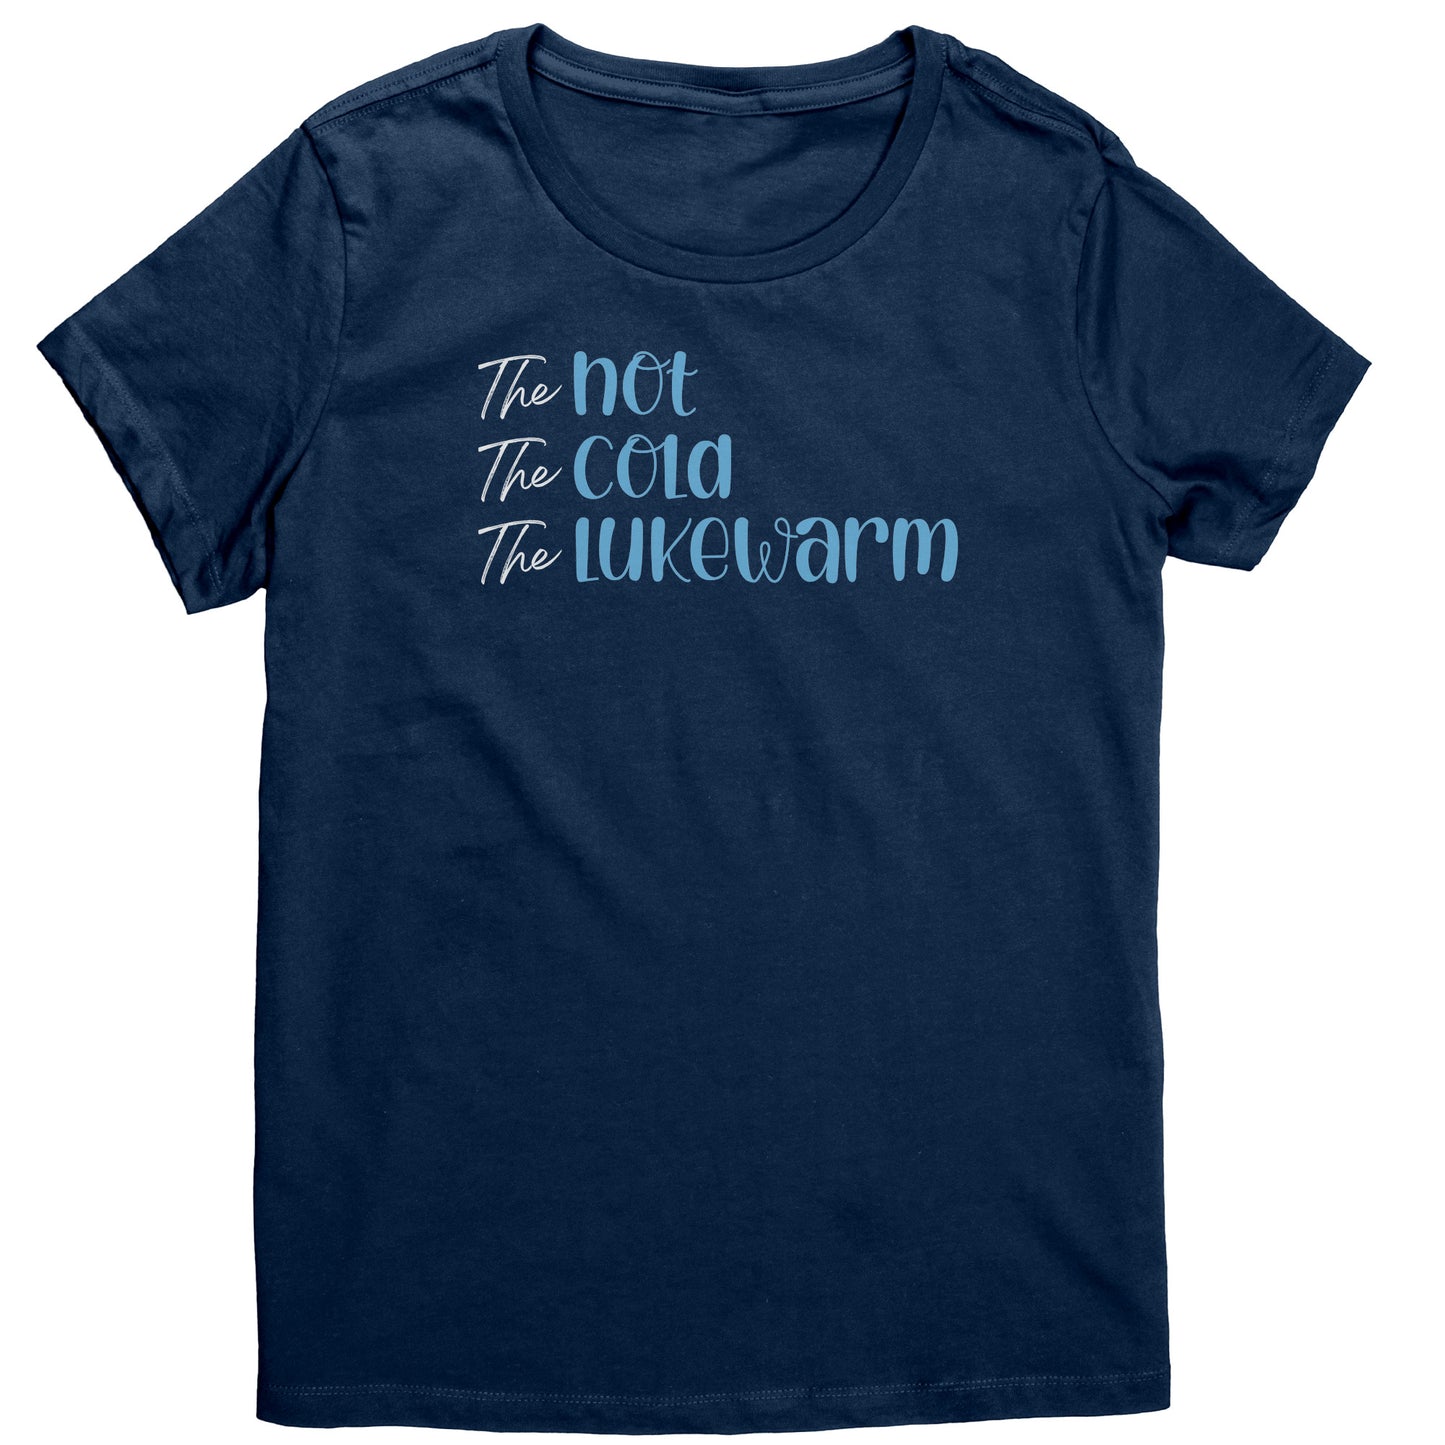 The Hot, The Cold, The Lukewarm Women's T-Shirt Part 2